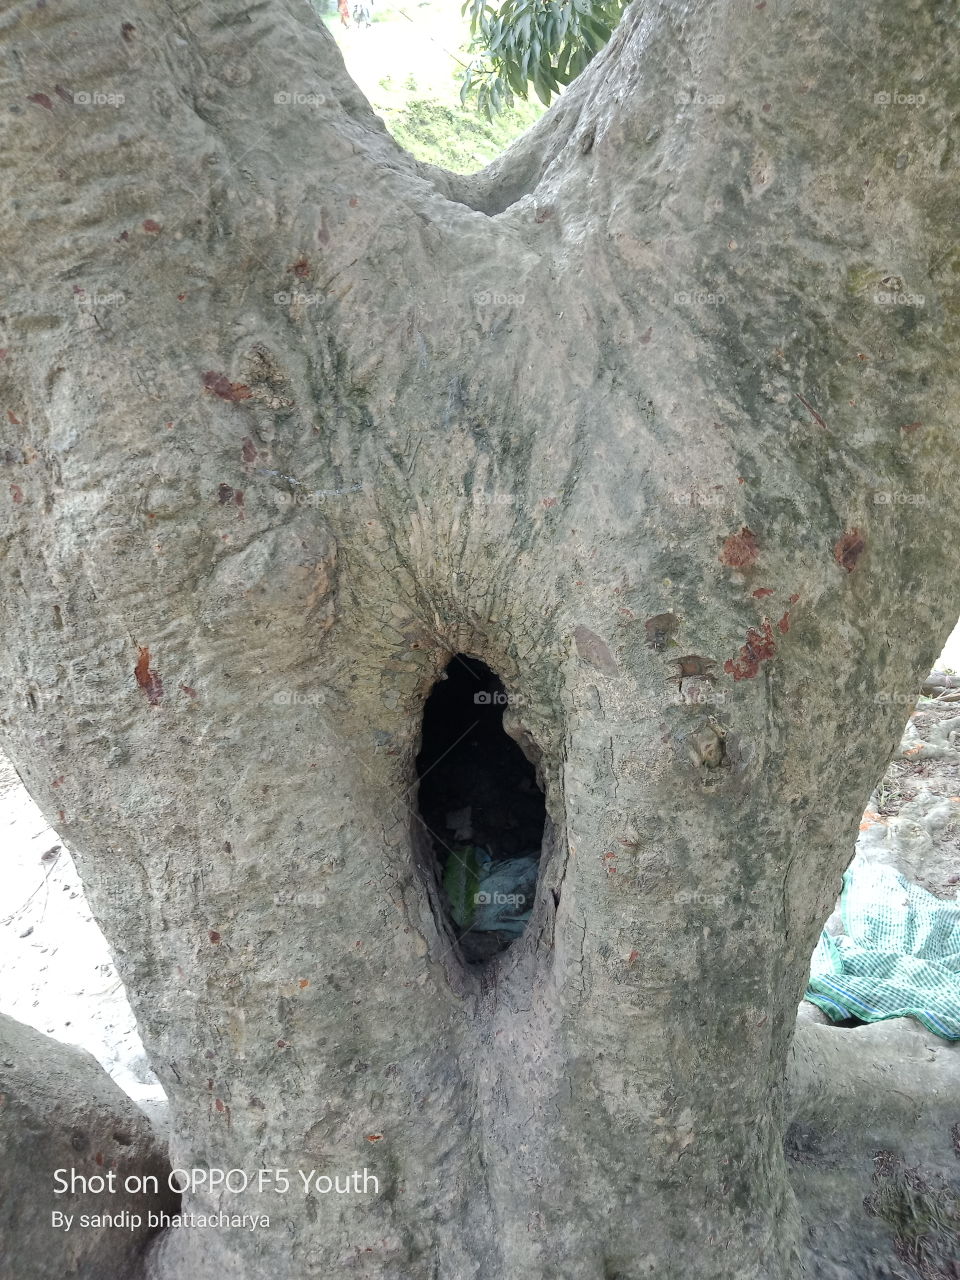 hole in the tree